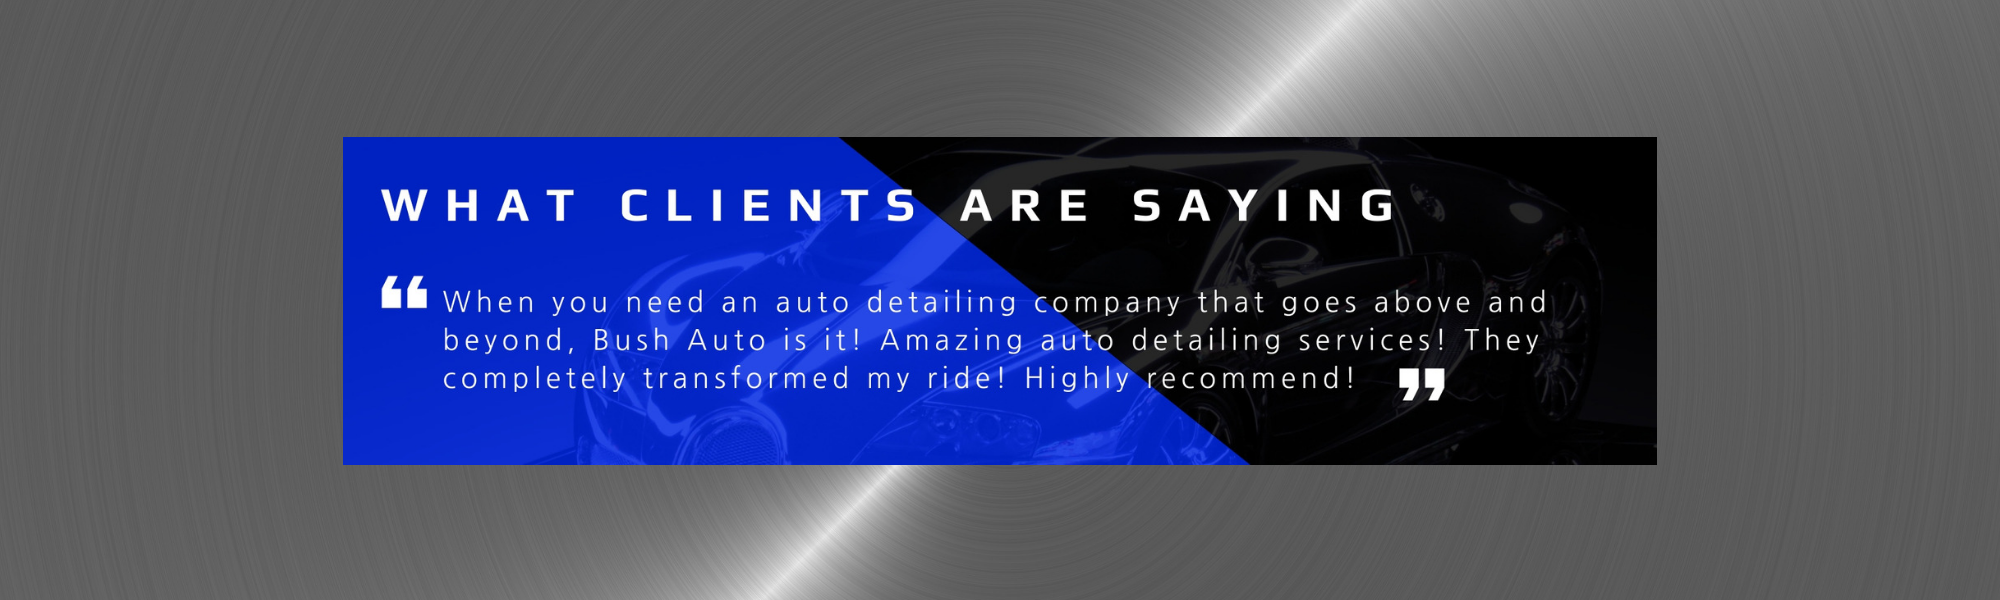 What clients are saying about Bush Auto Detailing 